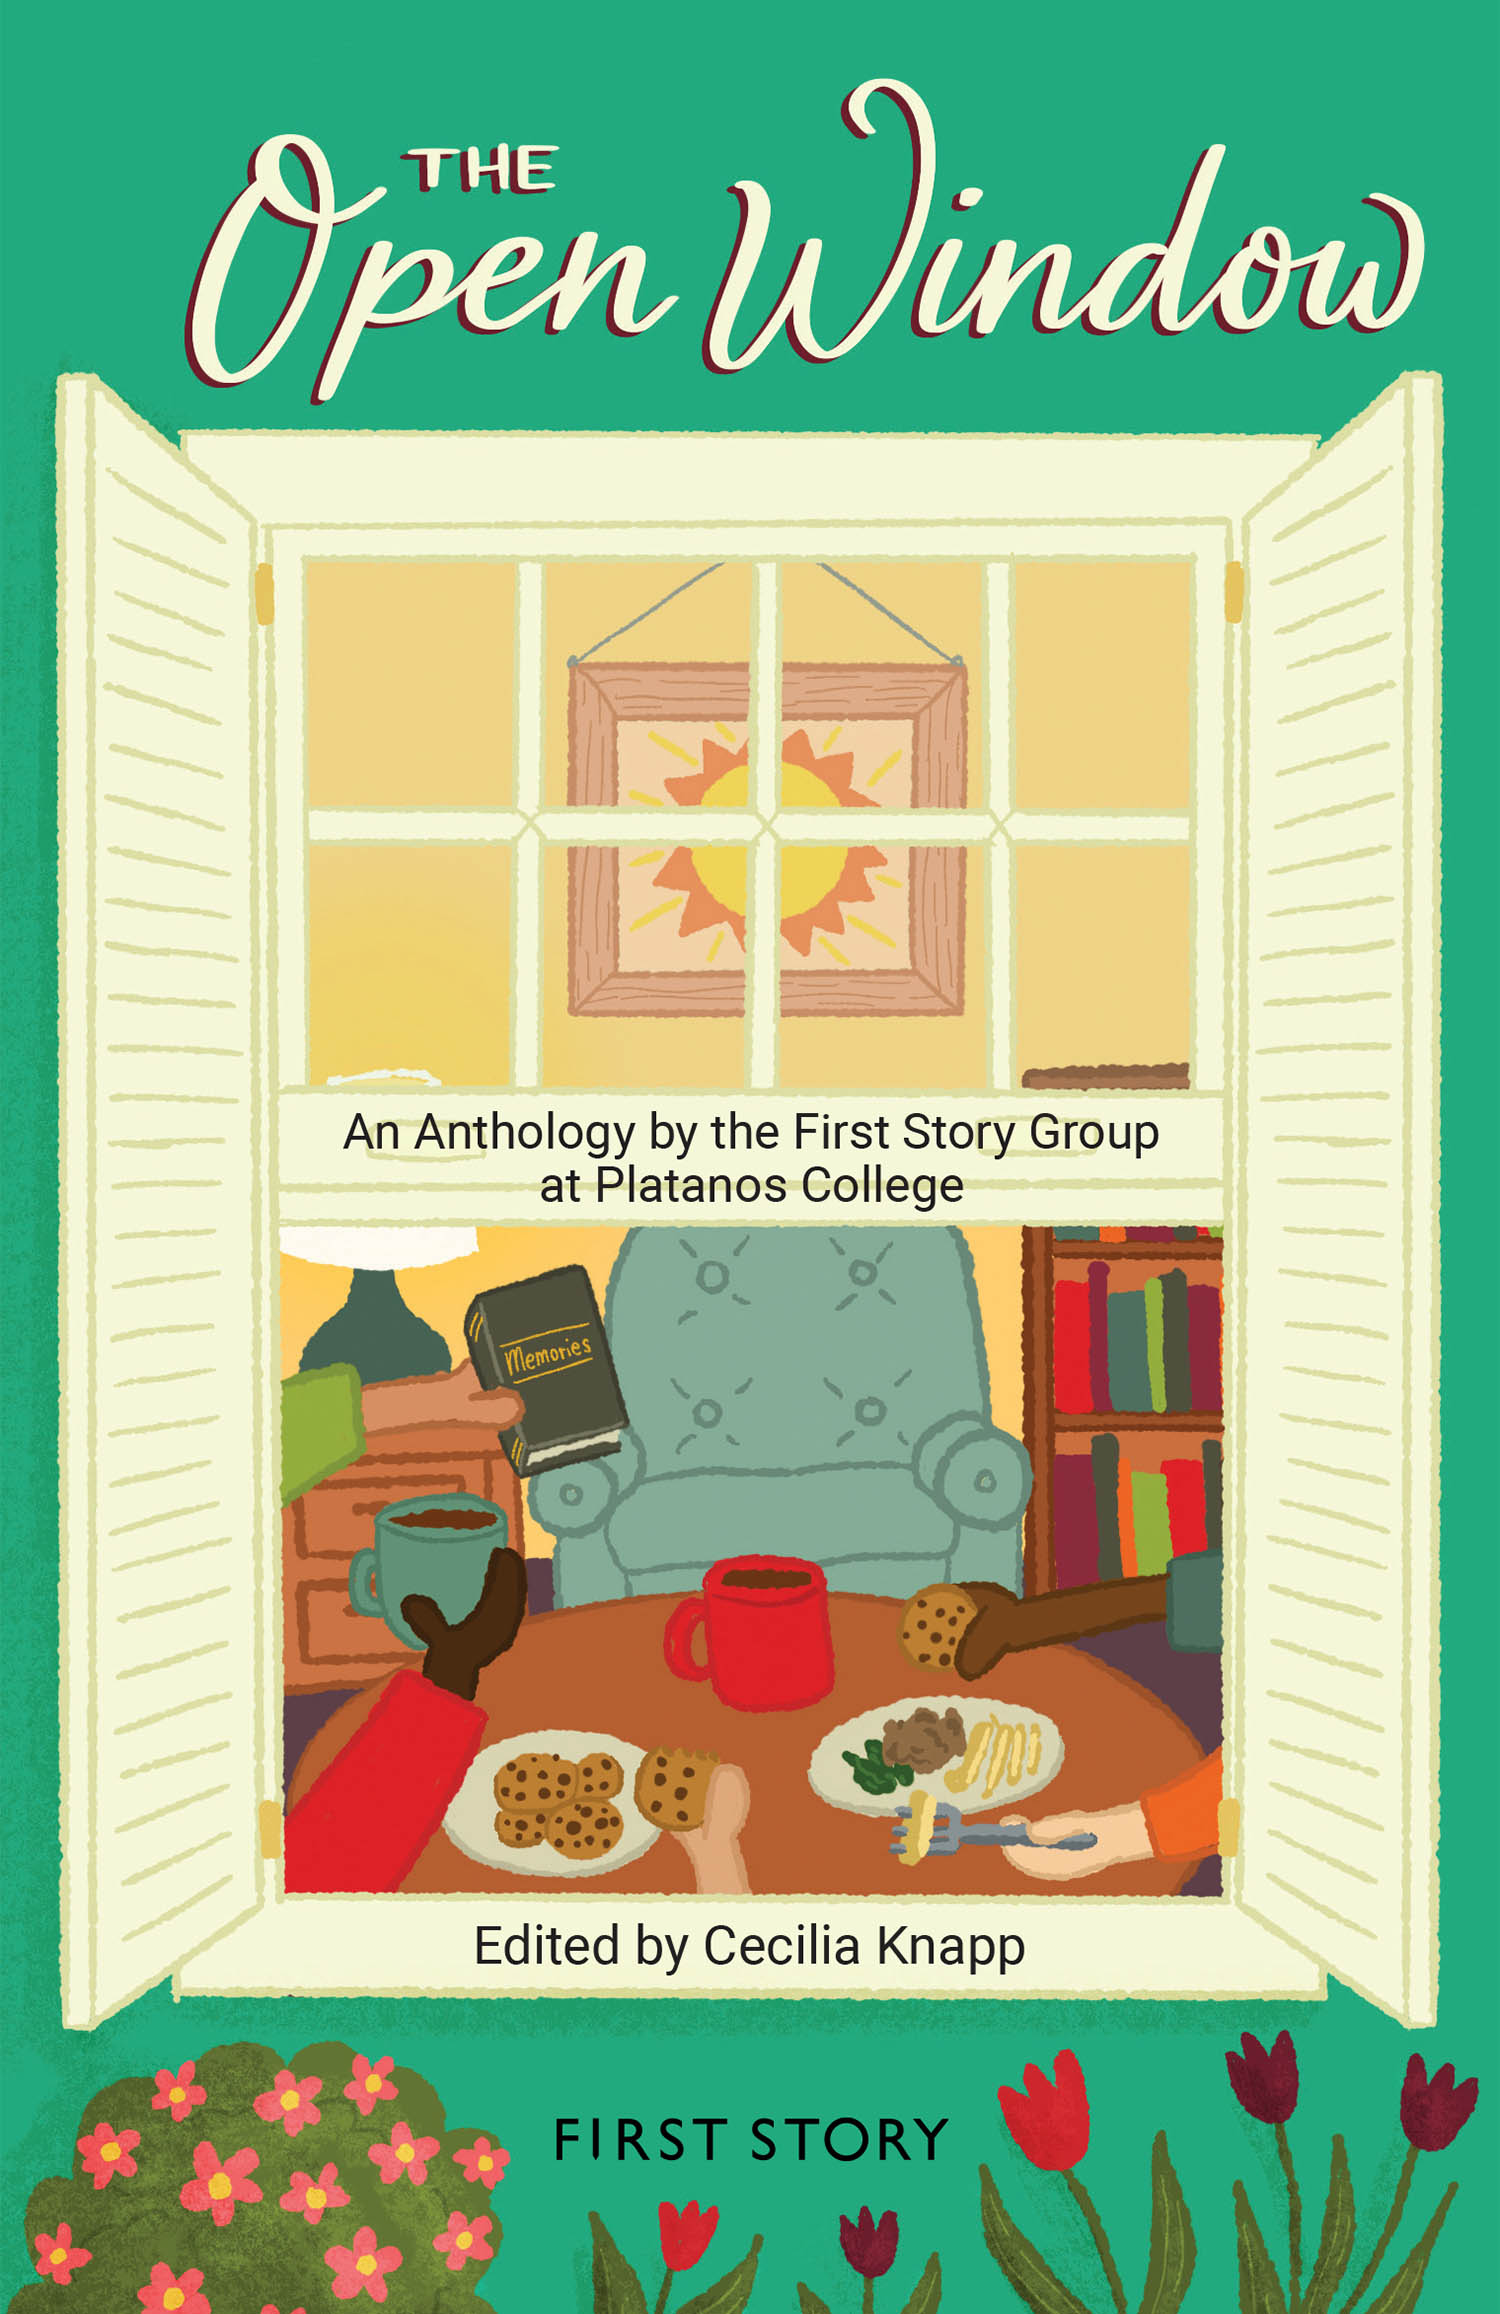 Cover of First Story Anthology for Platanos College, titled The Open Window